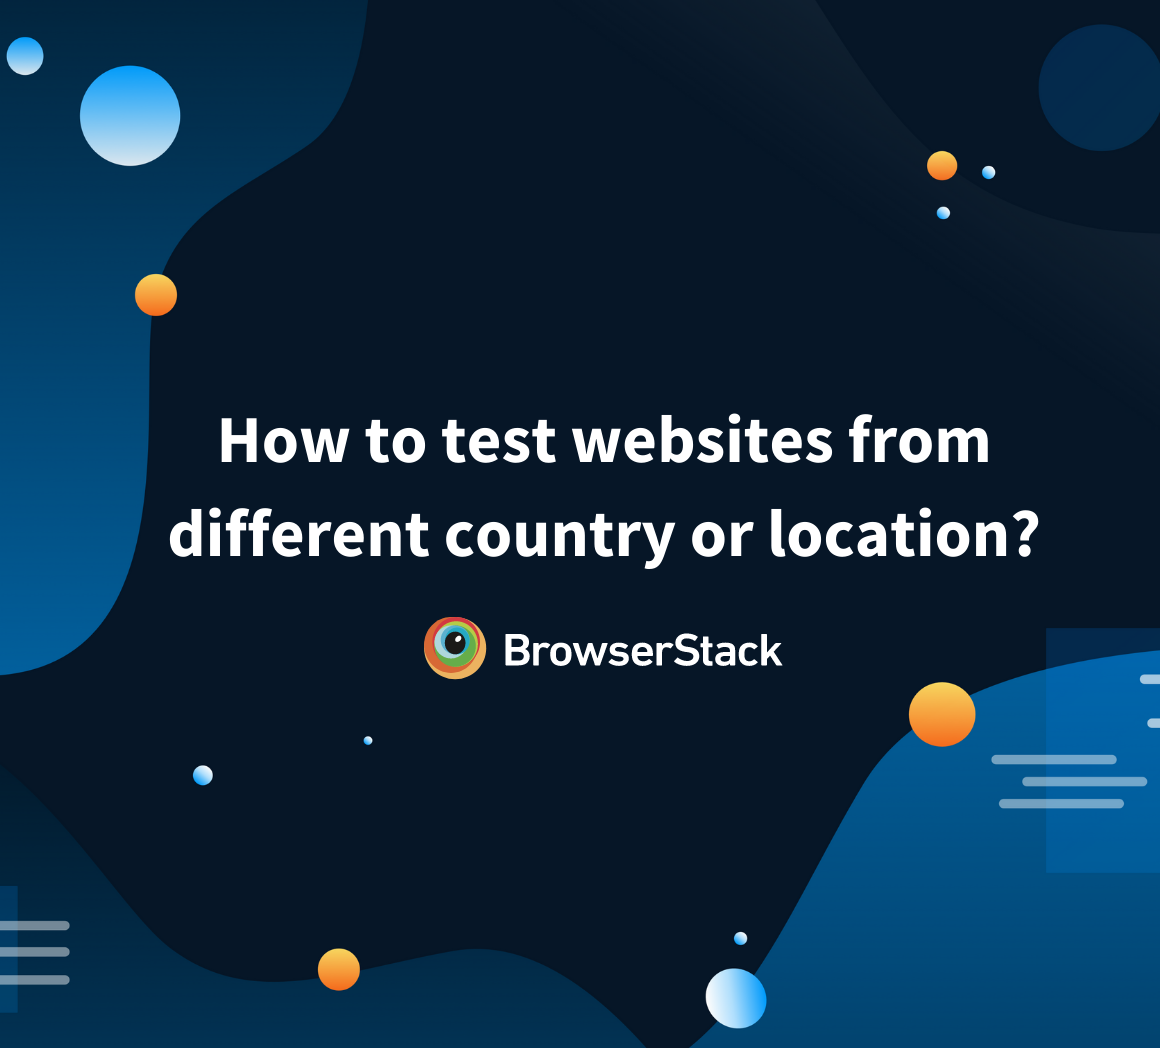 How to test websites from different country or location